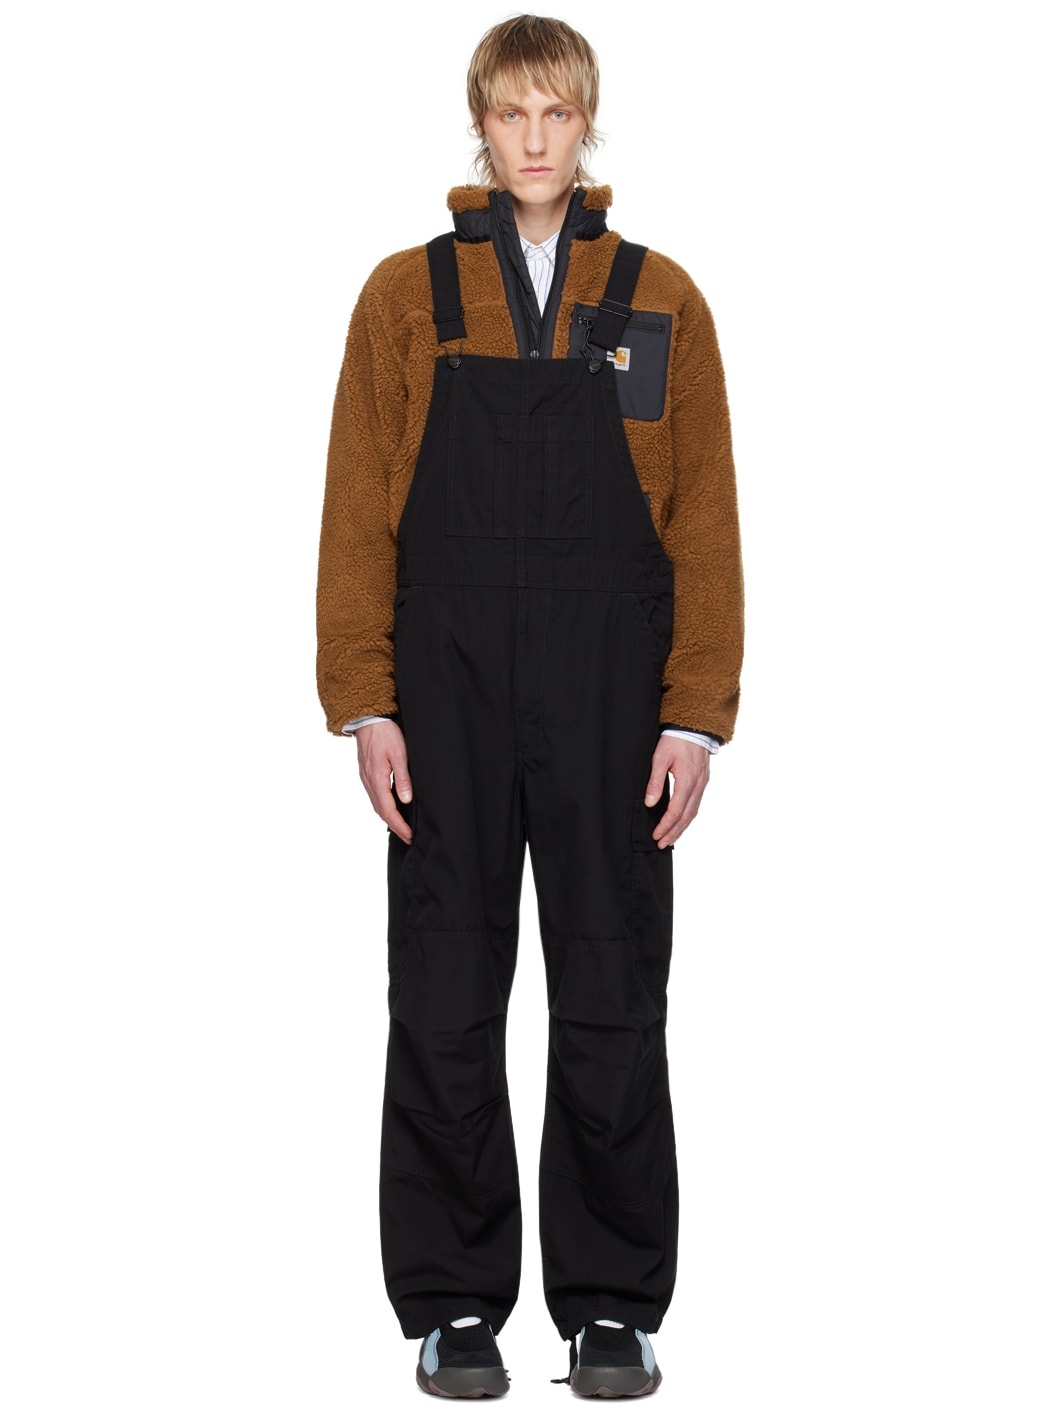 Black Patch Overalls - 1